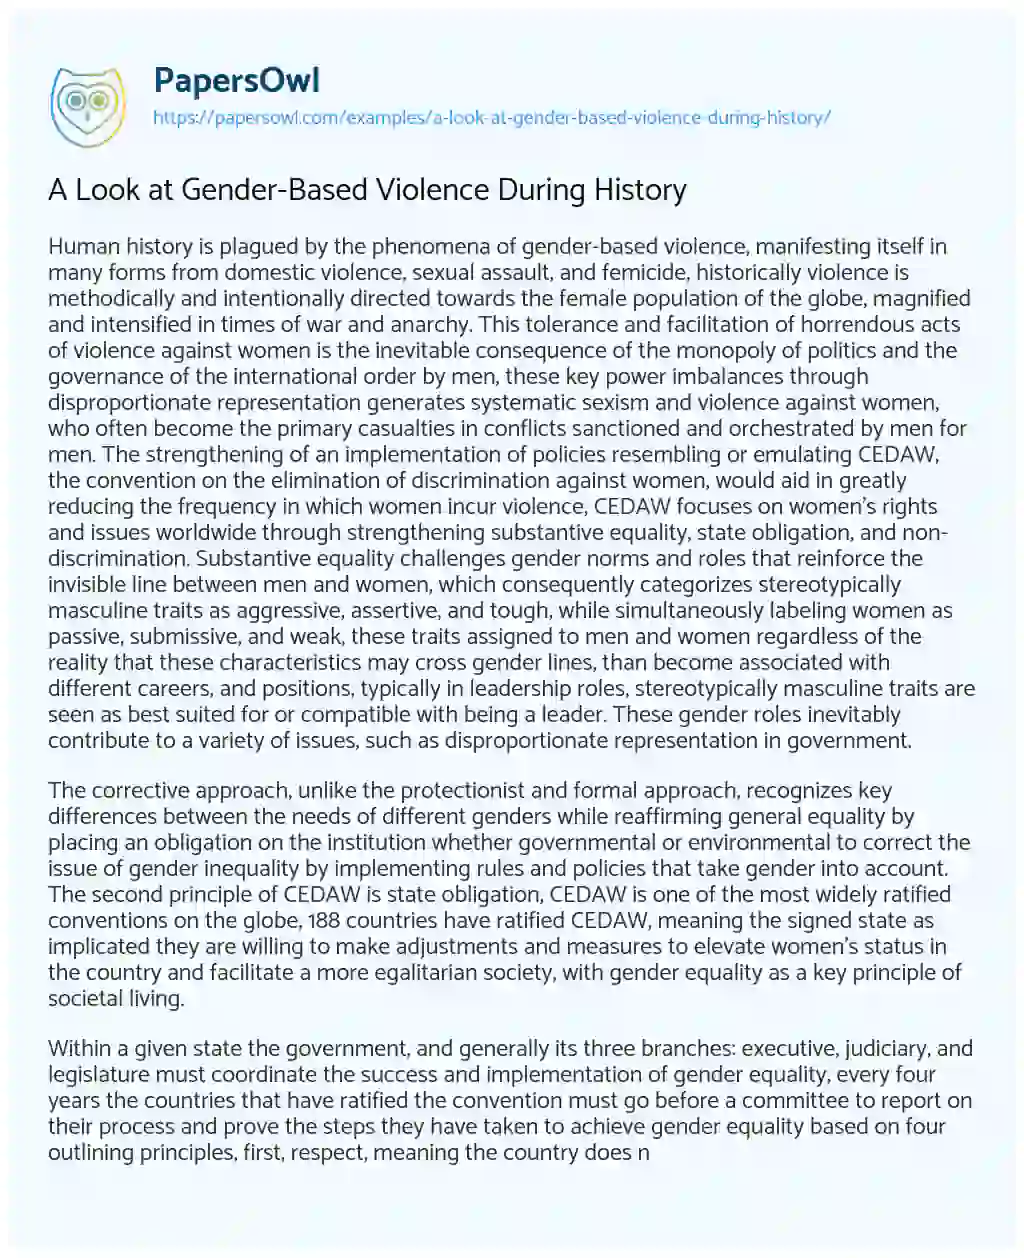 Essay on A Look at Gender-Based Violence during History